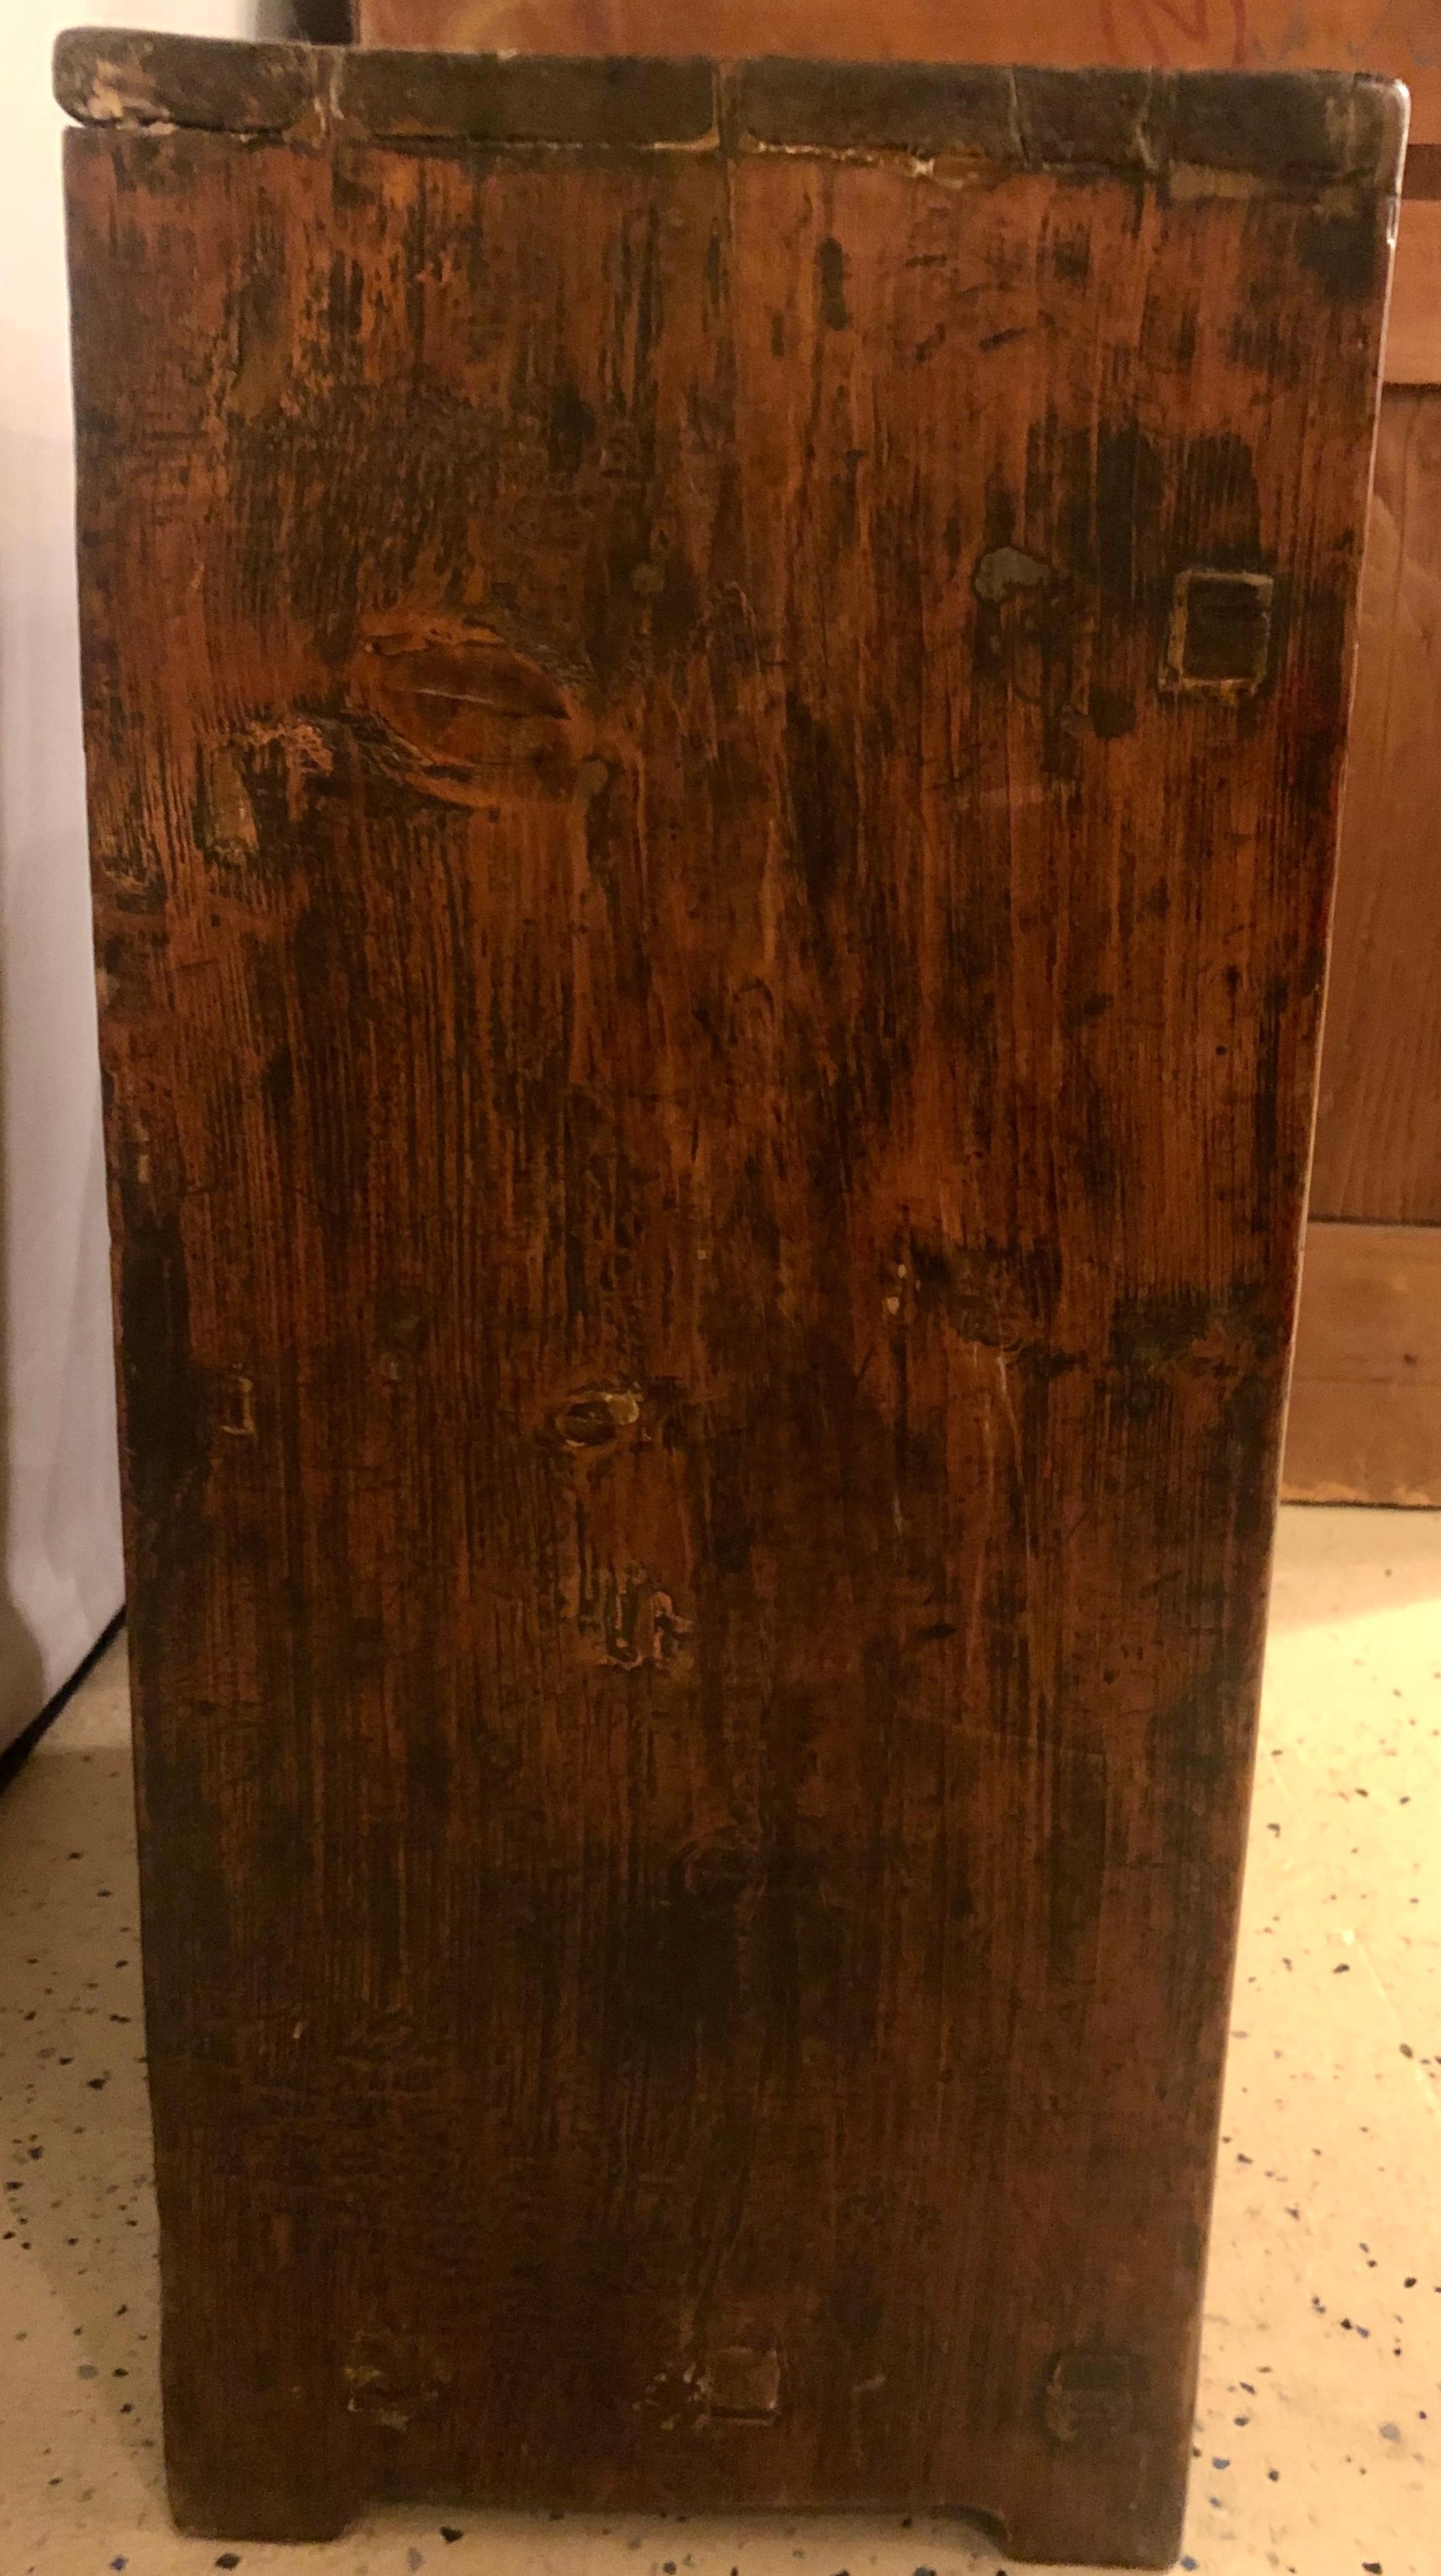 Small antique rustic cabinet / end or side table having a single leather pull on each door or drawer. Shelved interior. 

lia.